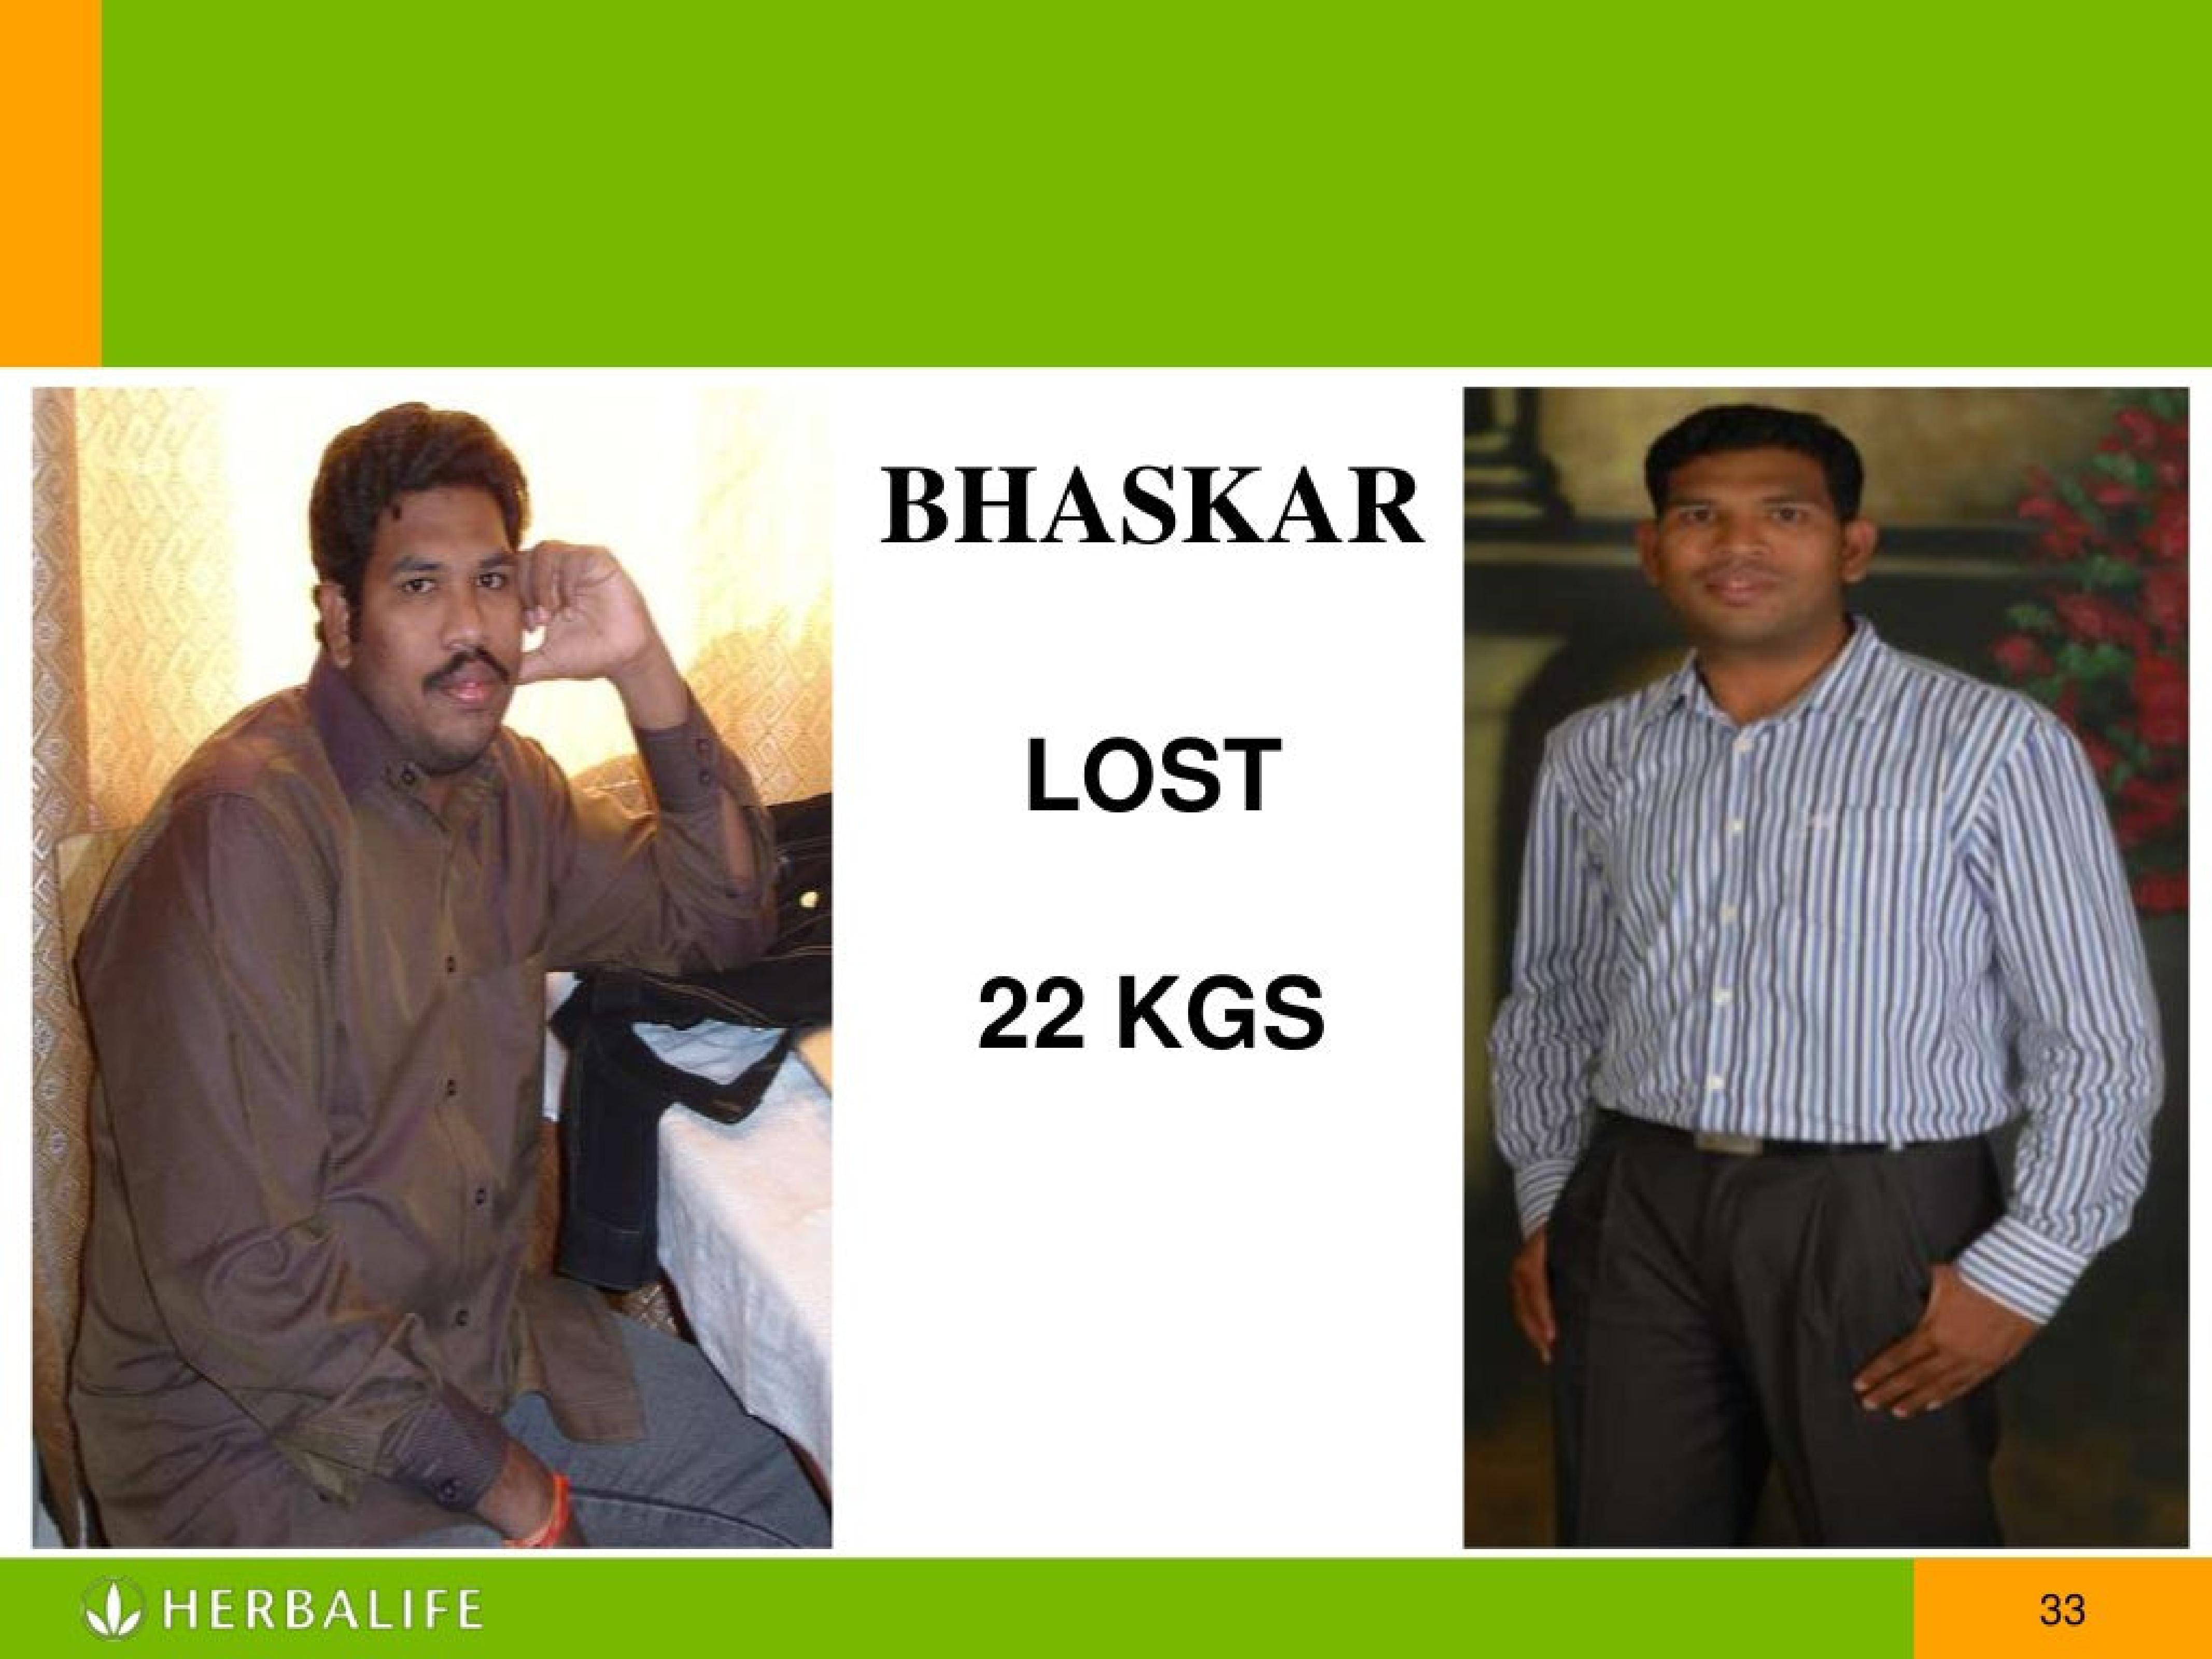 Herbalife Vengal Rao Nagar Hyderabad 9160255159,Hyderabad,Services,Free Classifieds,Post Free Ads,77traders.com